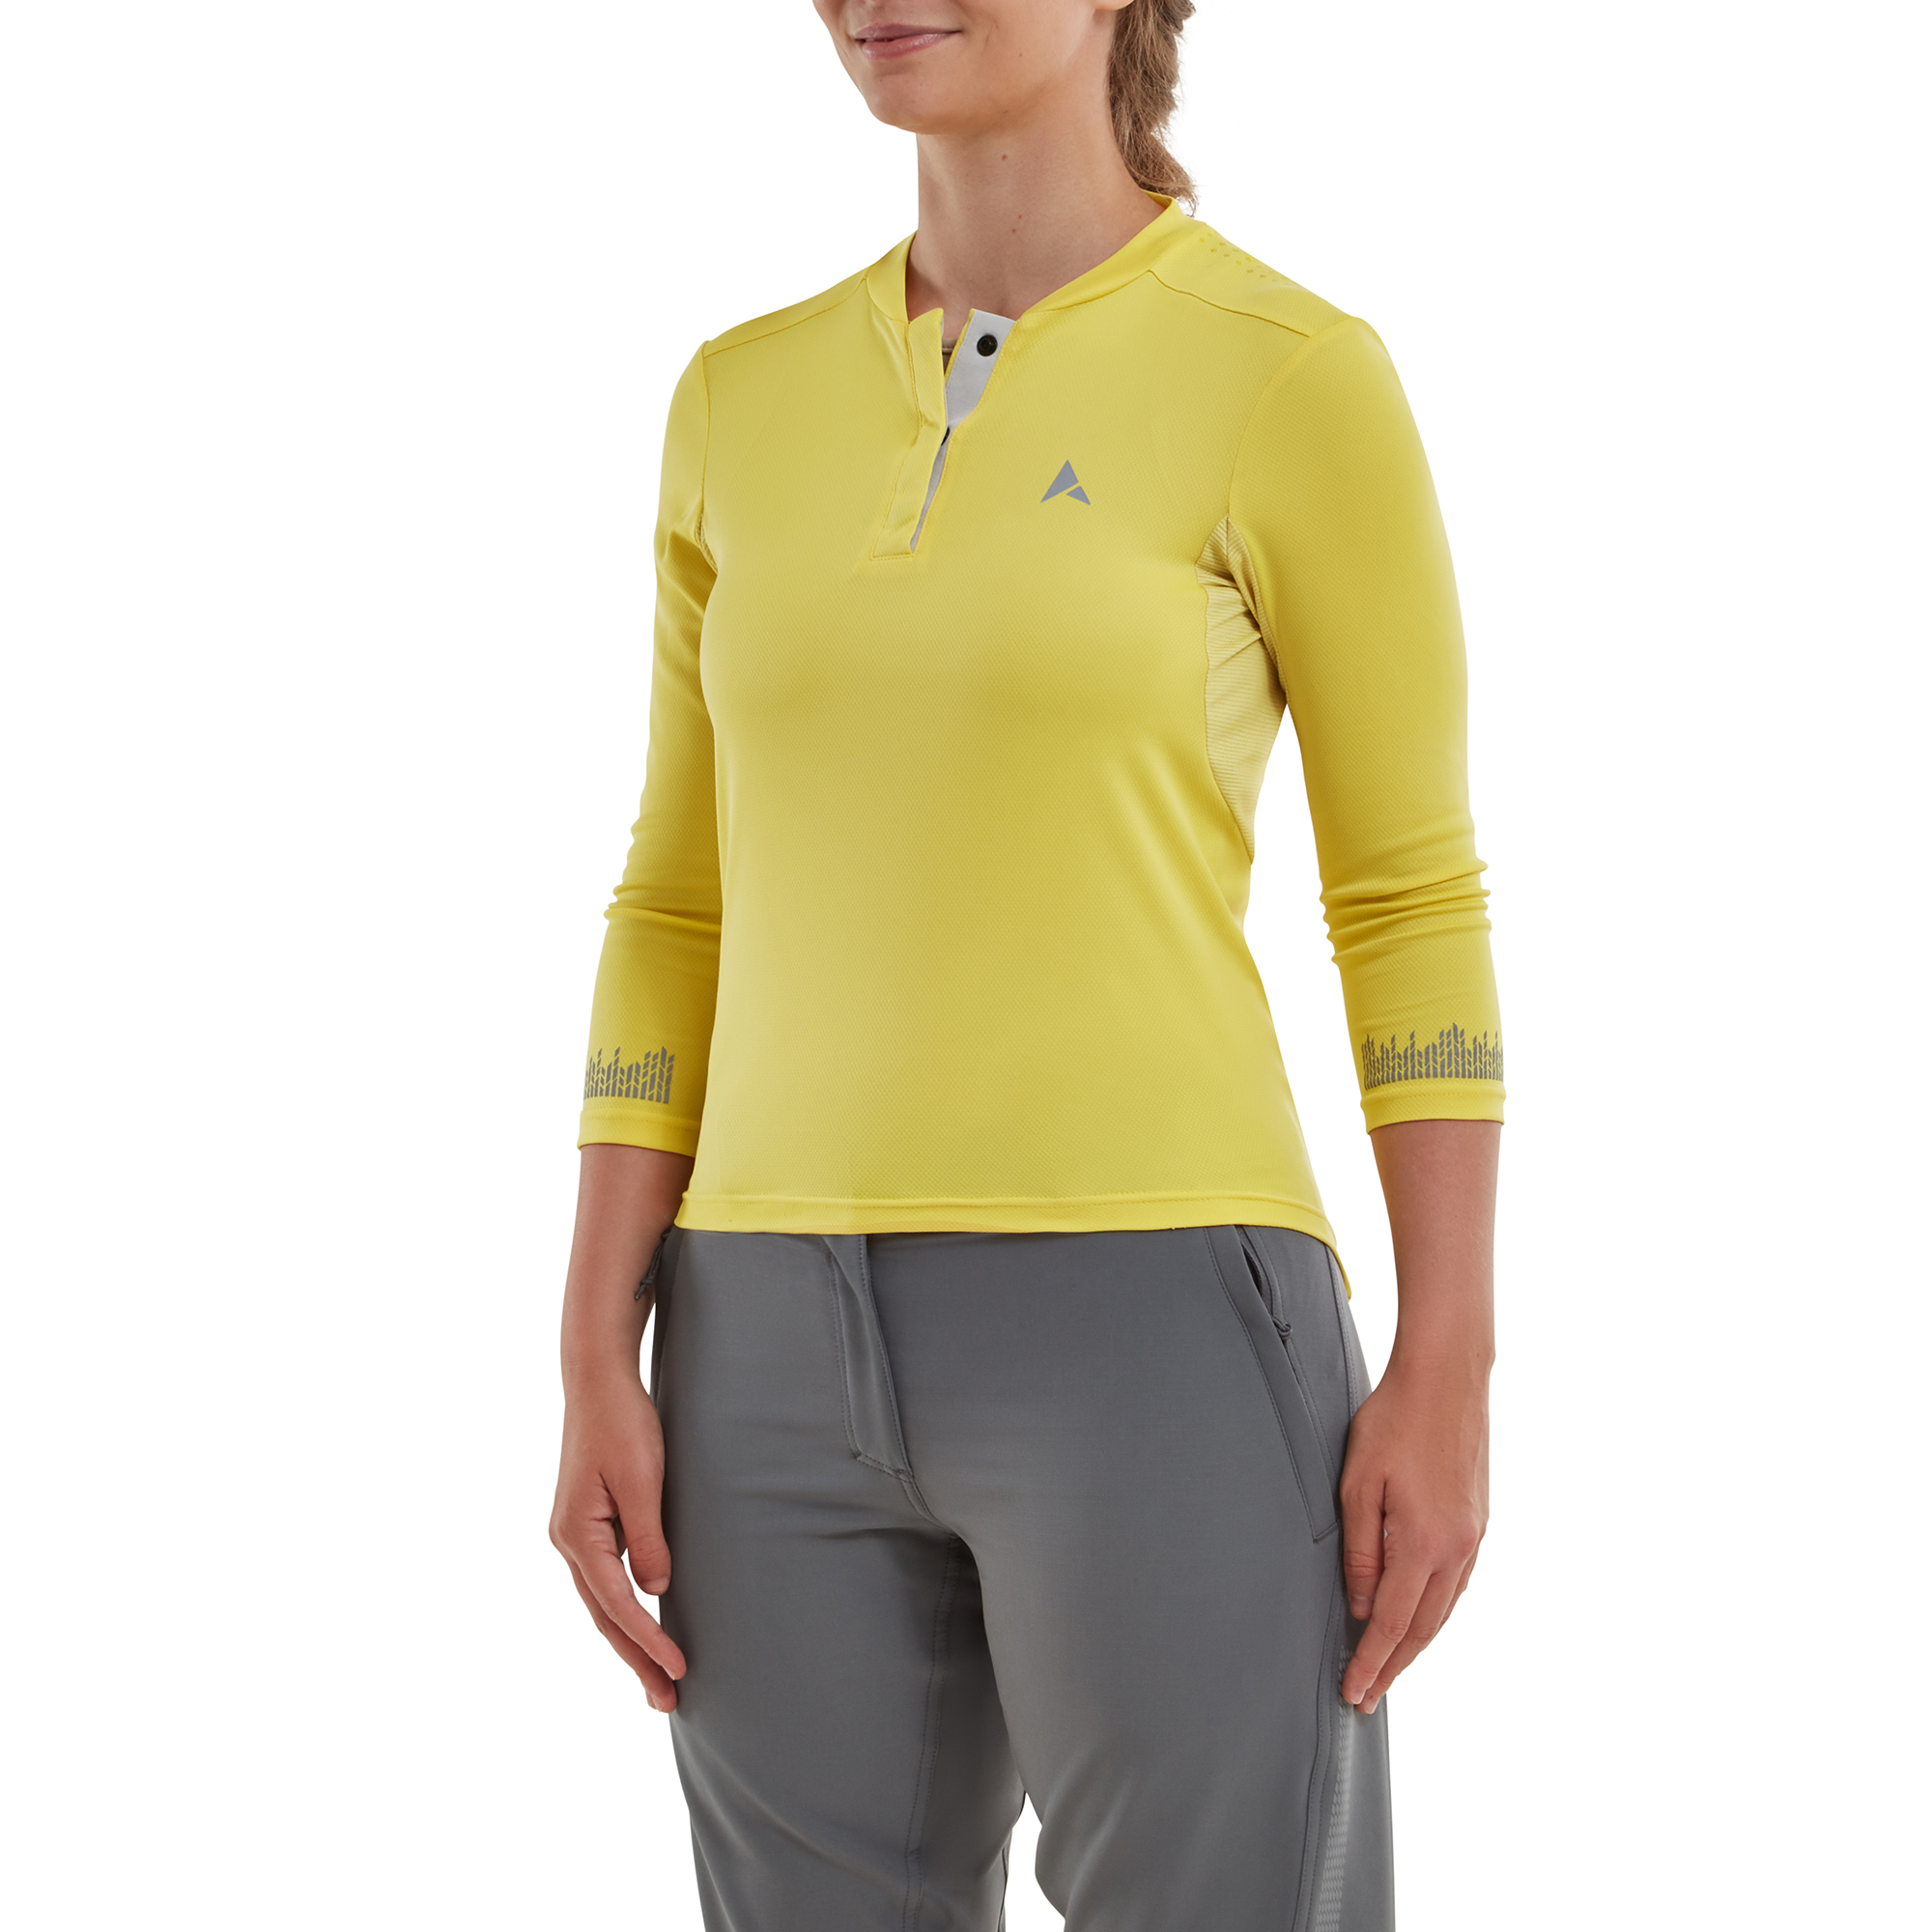 Altura  Women’s 3/4 Sleeve All Road Jersey 14 YELLOW